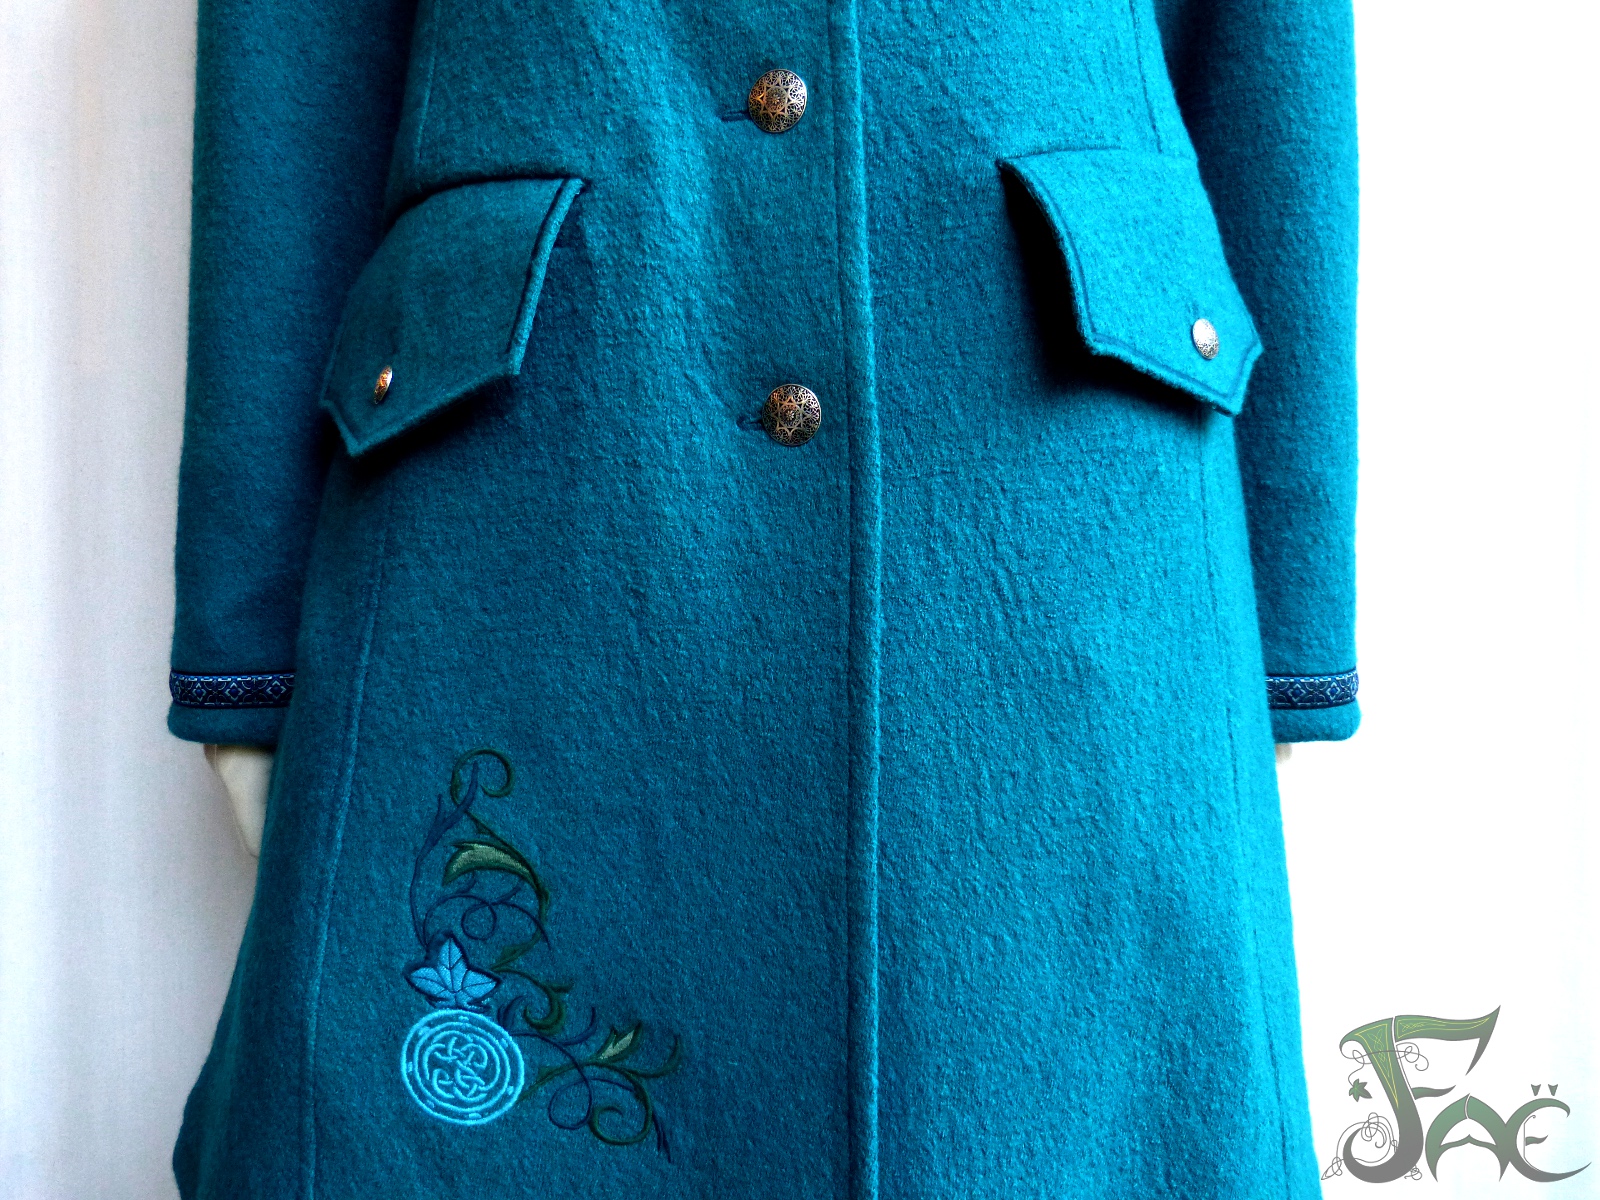 Manteau turquoise, broderie